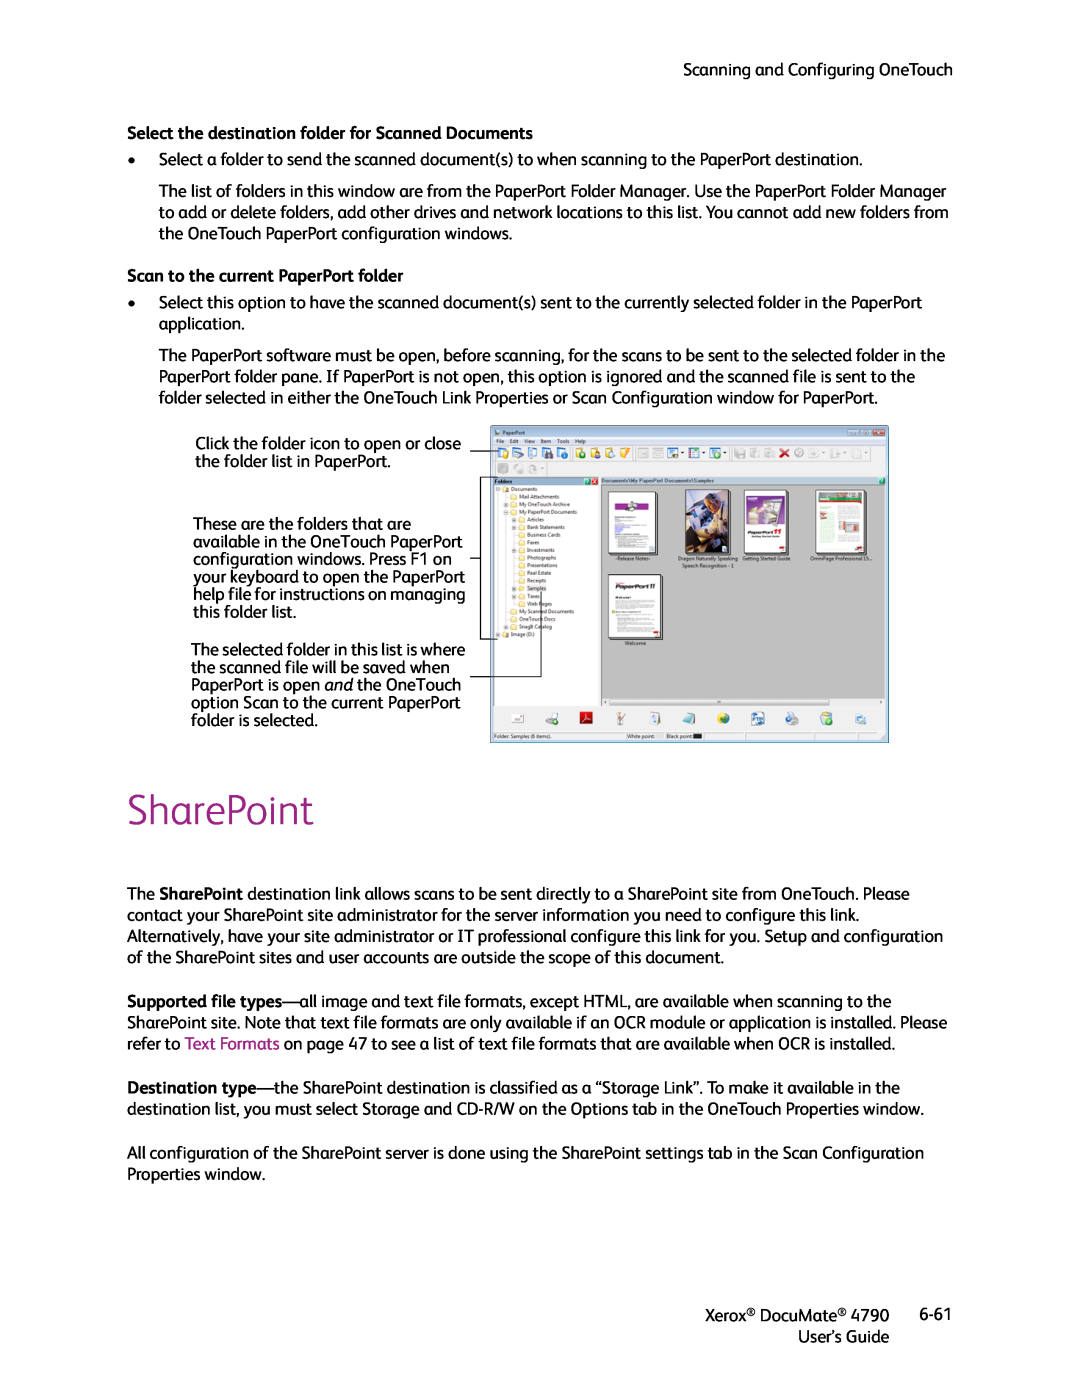 Xerox xerox documate SharePoint, Select the destination folder for Scanned Documents, Scan to the current PaperPort folder 